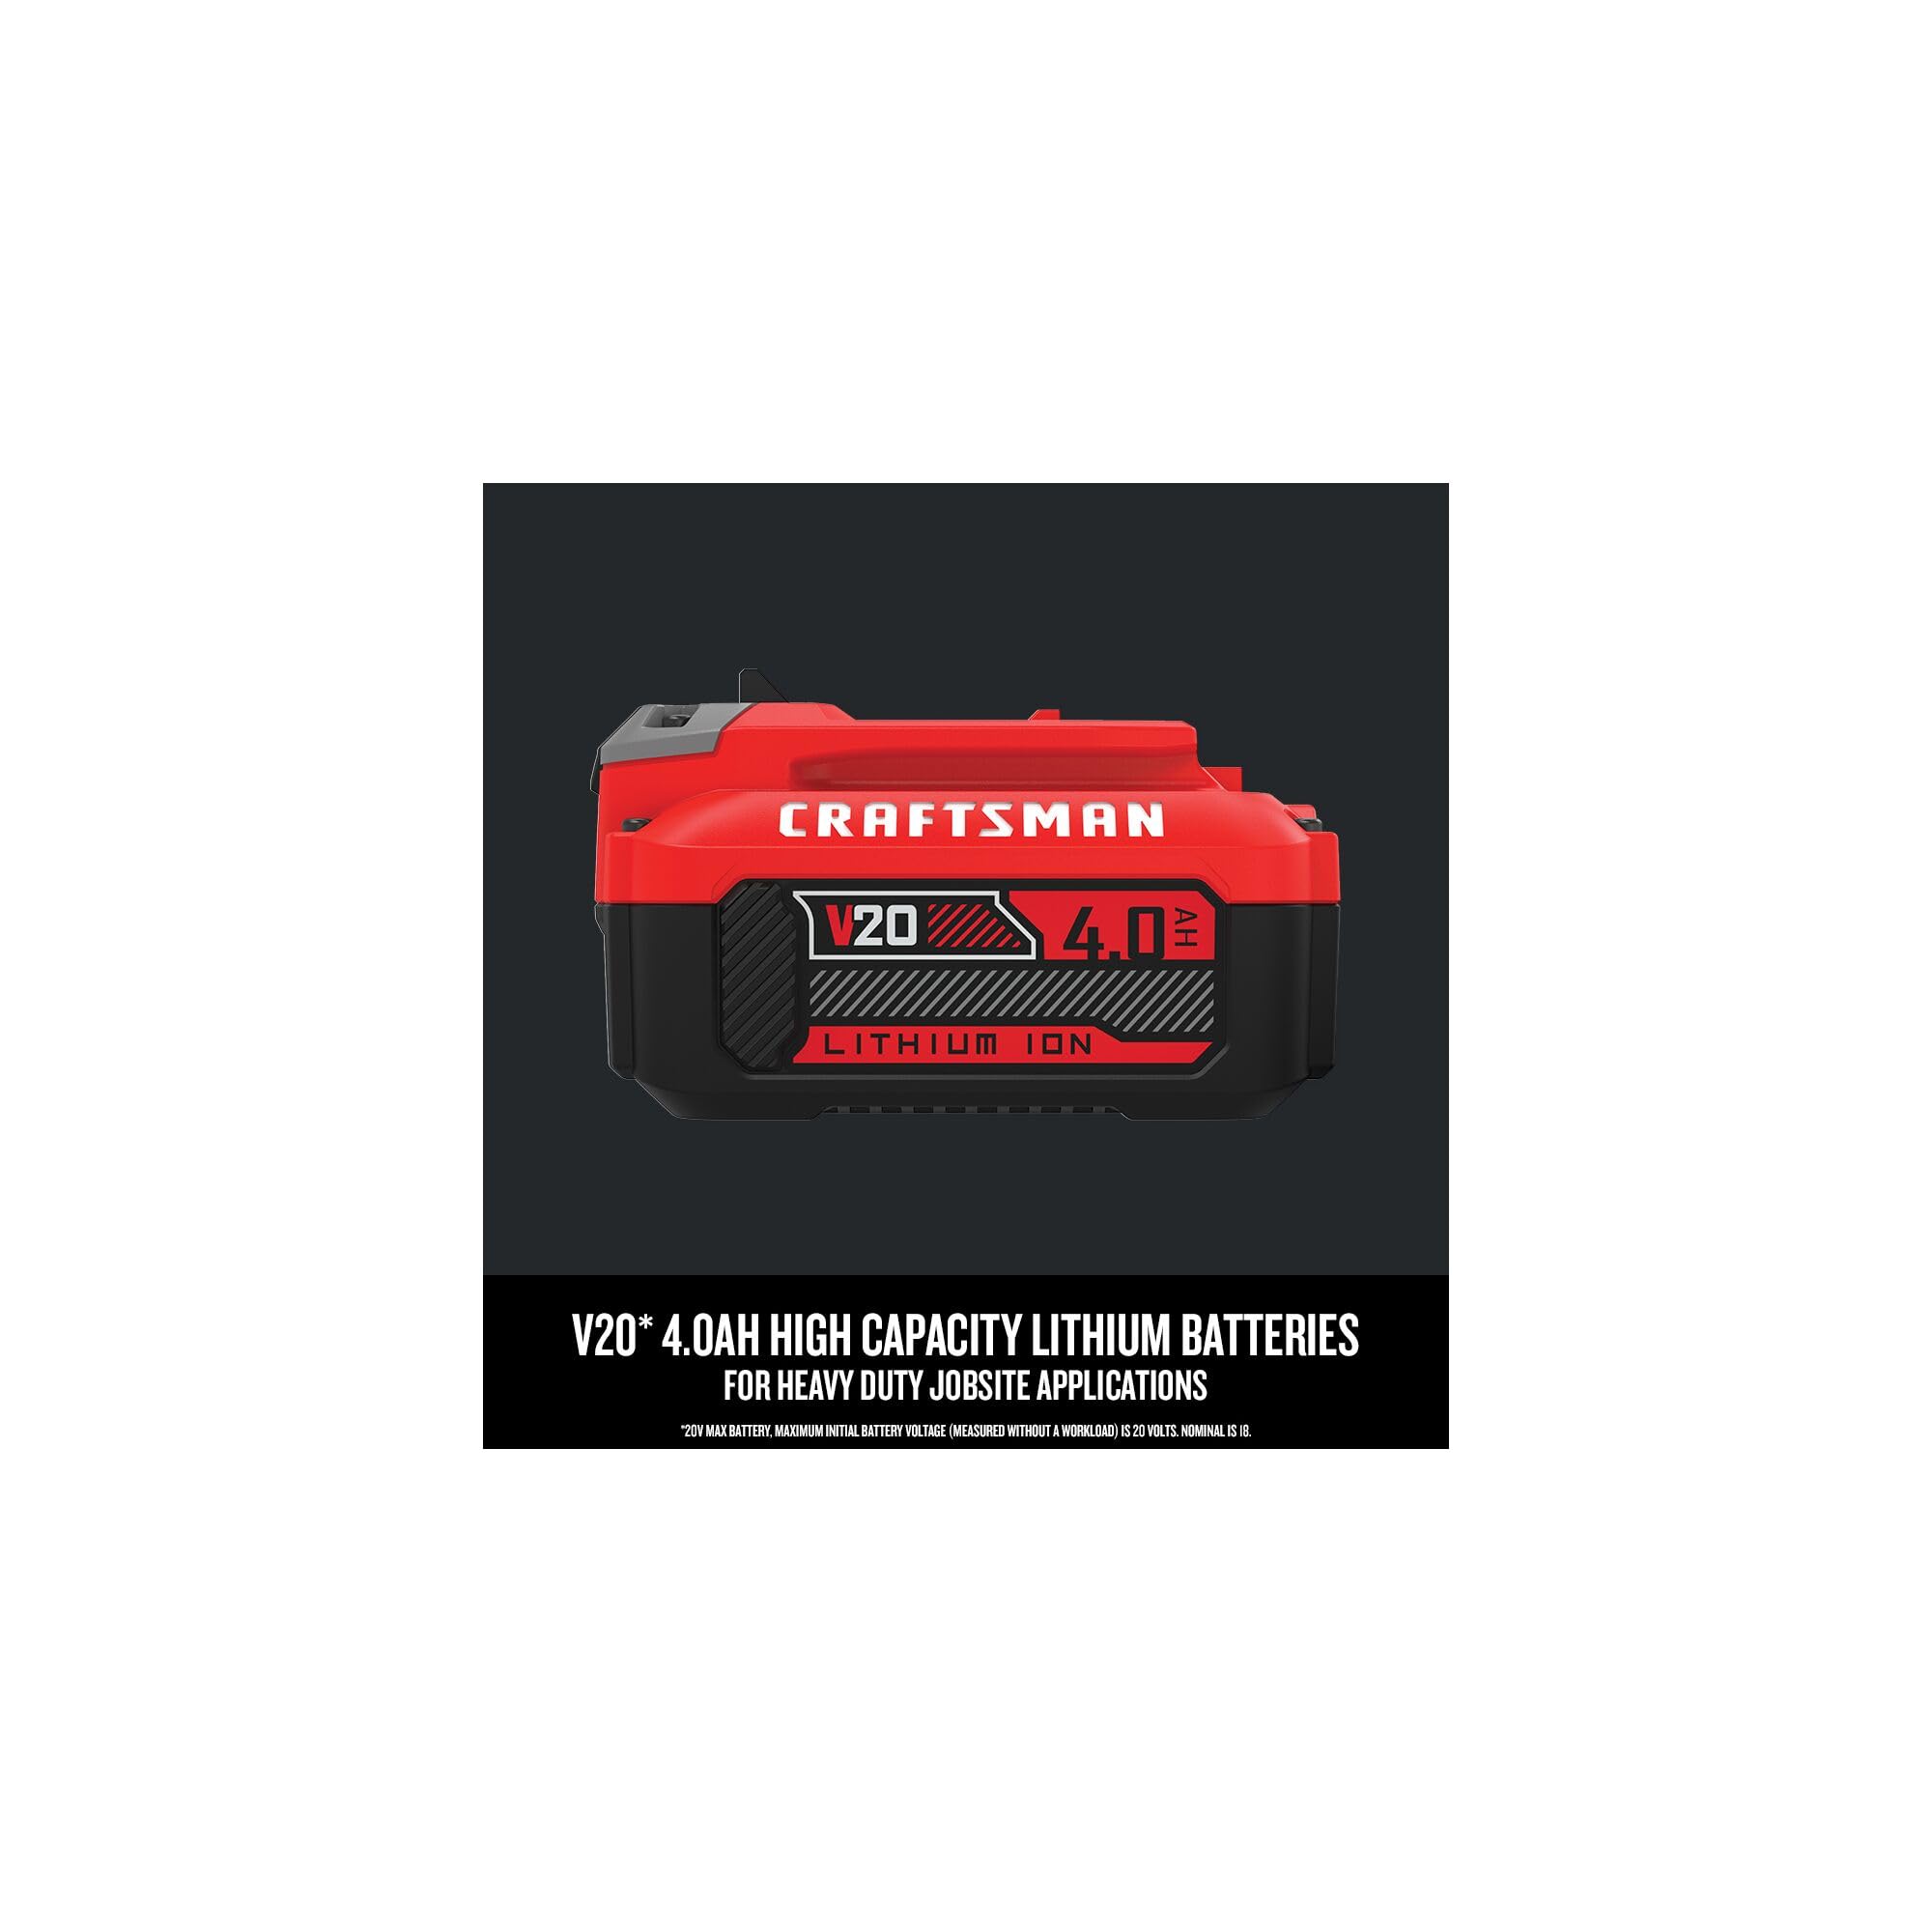 CRAFTSMAN V20 Battery, 4.0 Ah, 2 Pack, Lithium Ion Battery, LED Charge Indicator (CMCB204-2)